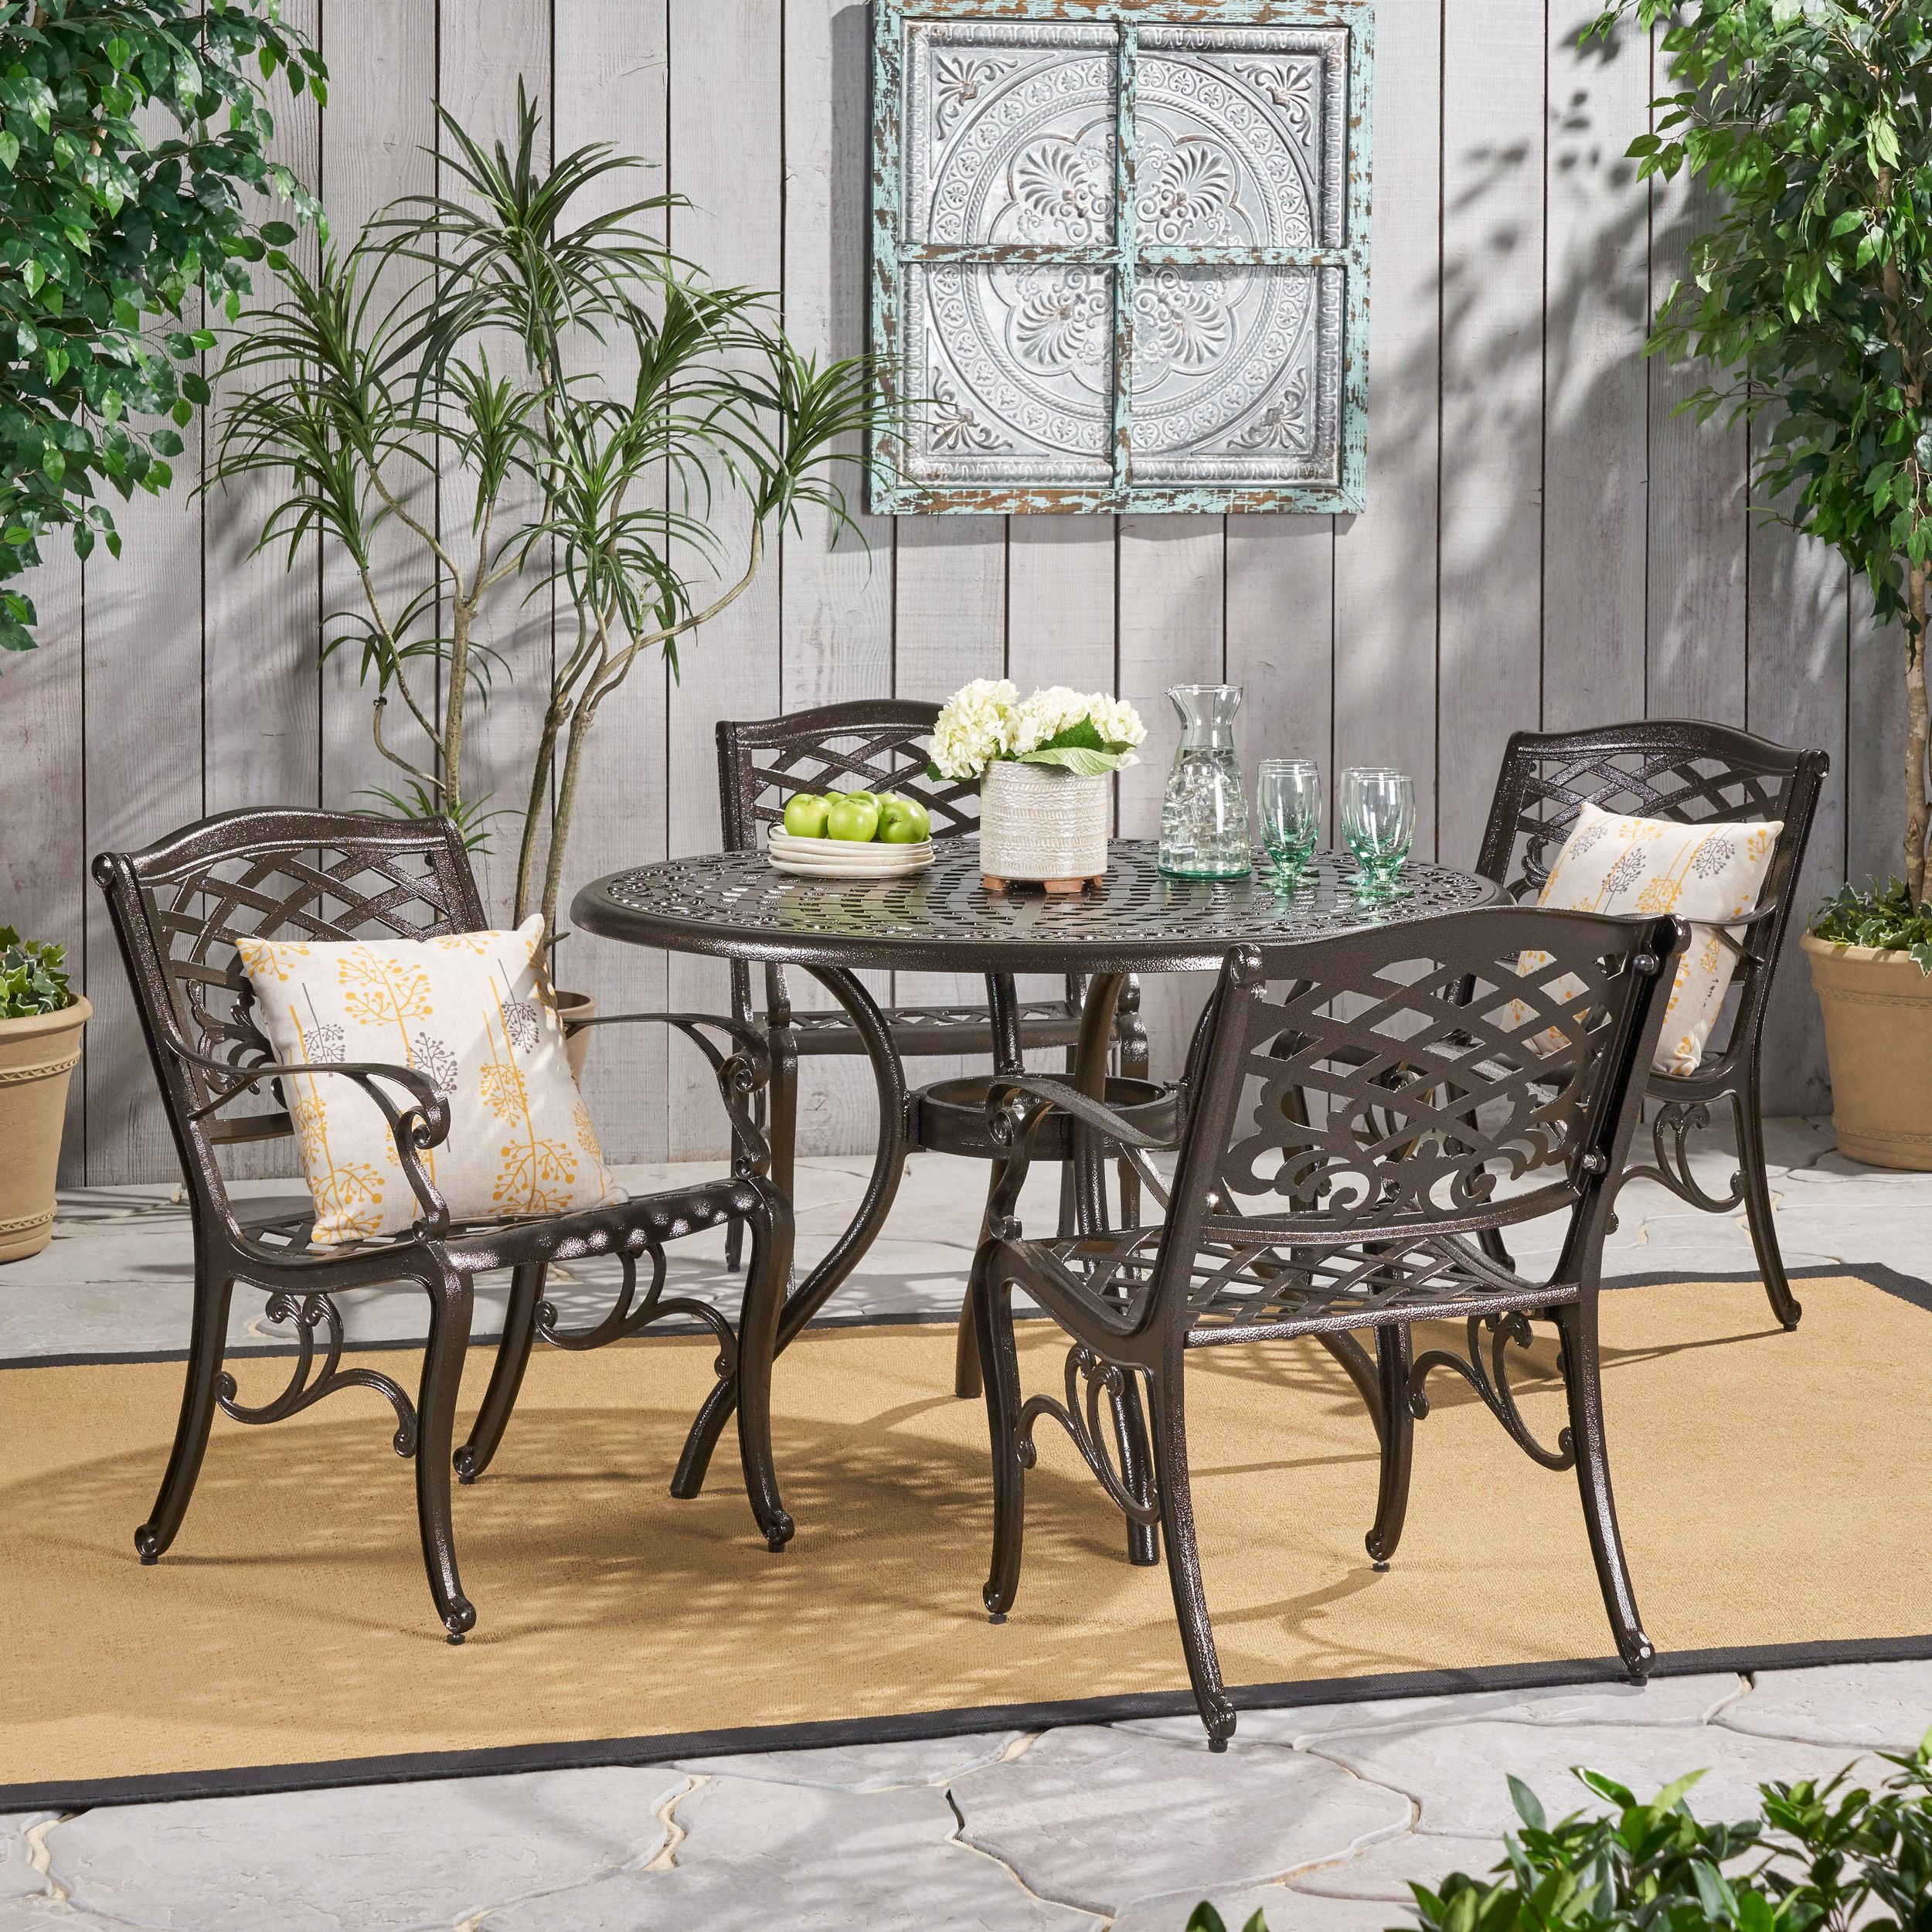 5 Piece Round Patio Dining Sets For Most Recent Outdoor 5 Piece Cast Aluminum Outdoor Dining Set, Bronze – Walmart (View 1 of 15)